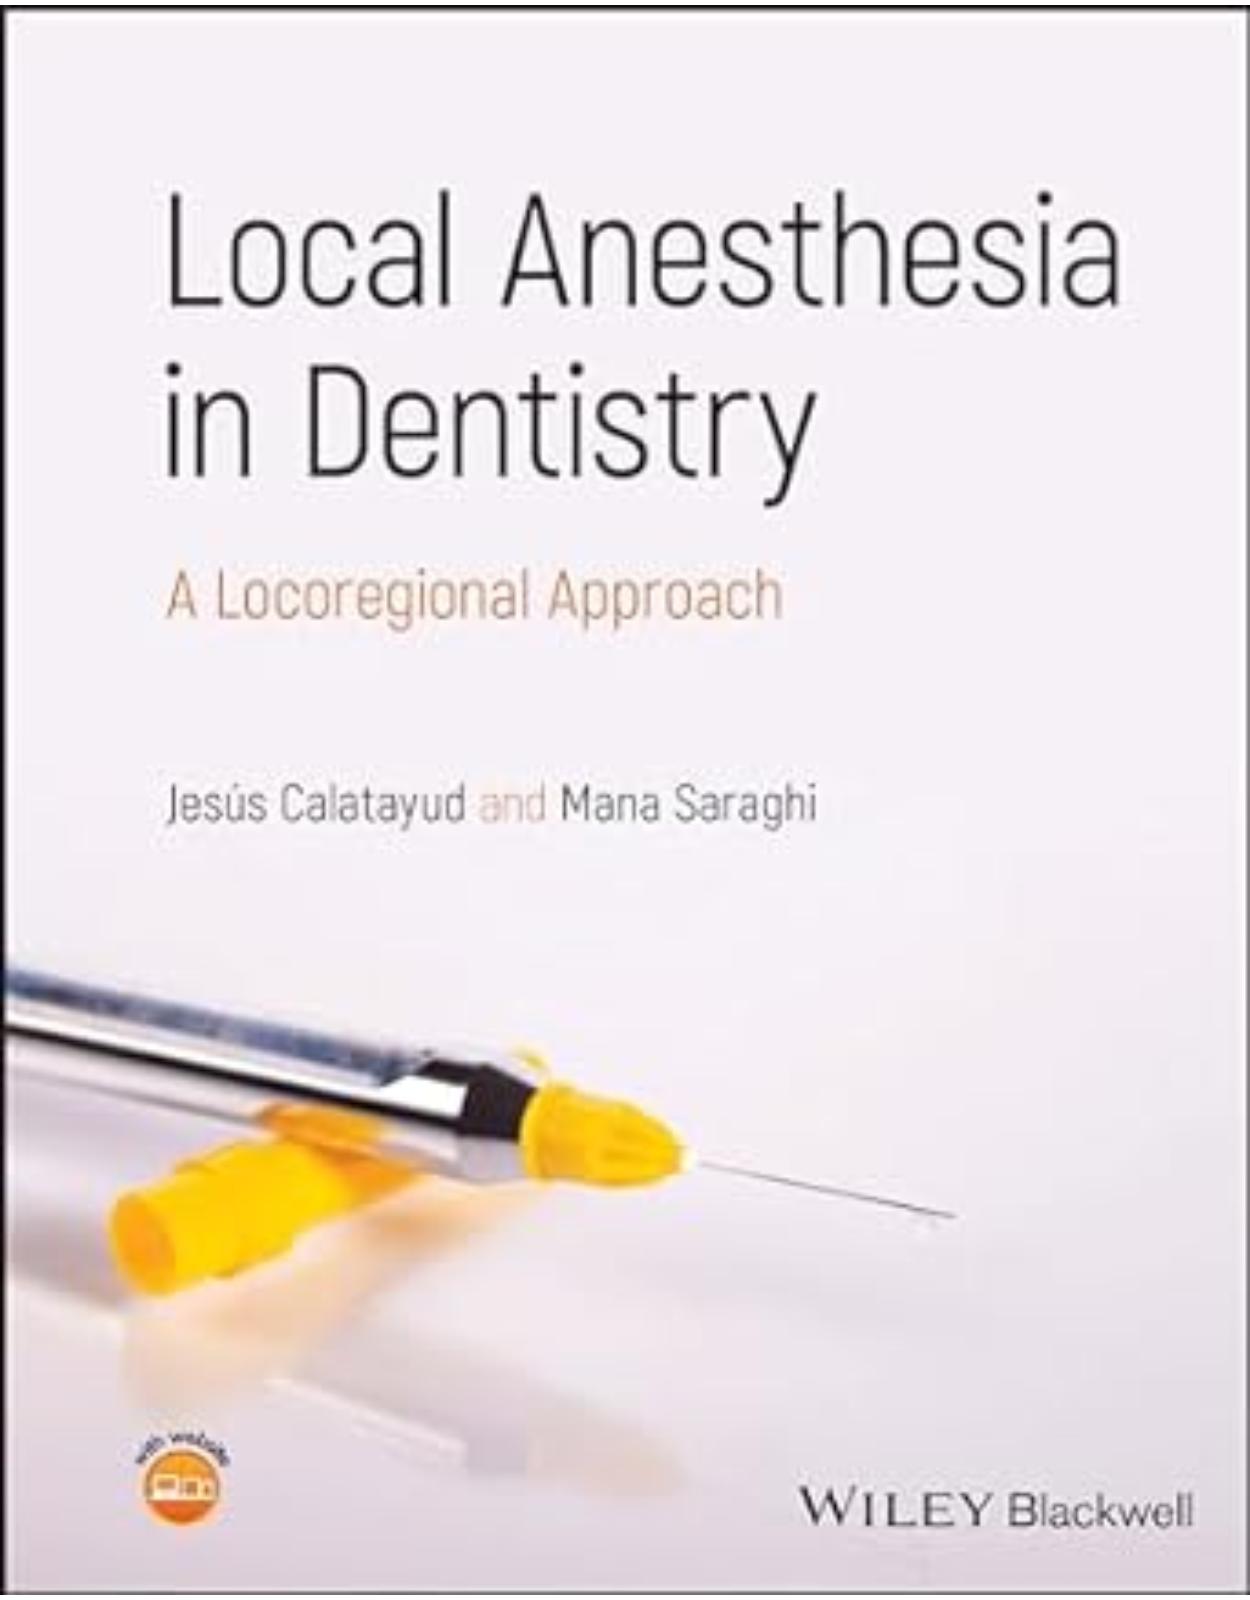 Local Anesthesia in Dentistry – A Locoregional Approach